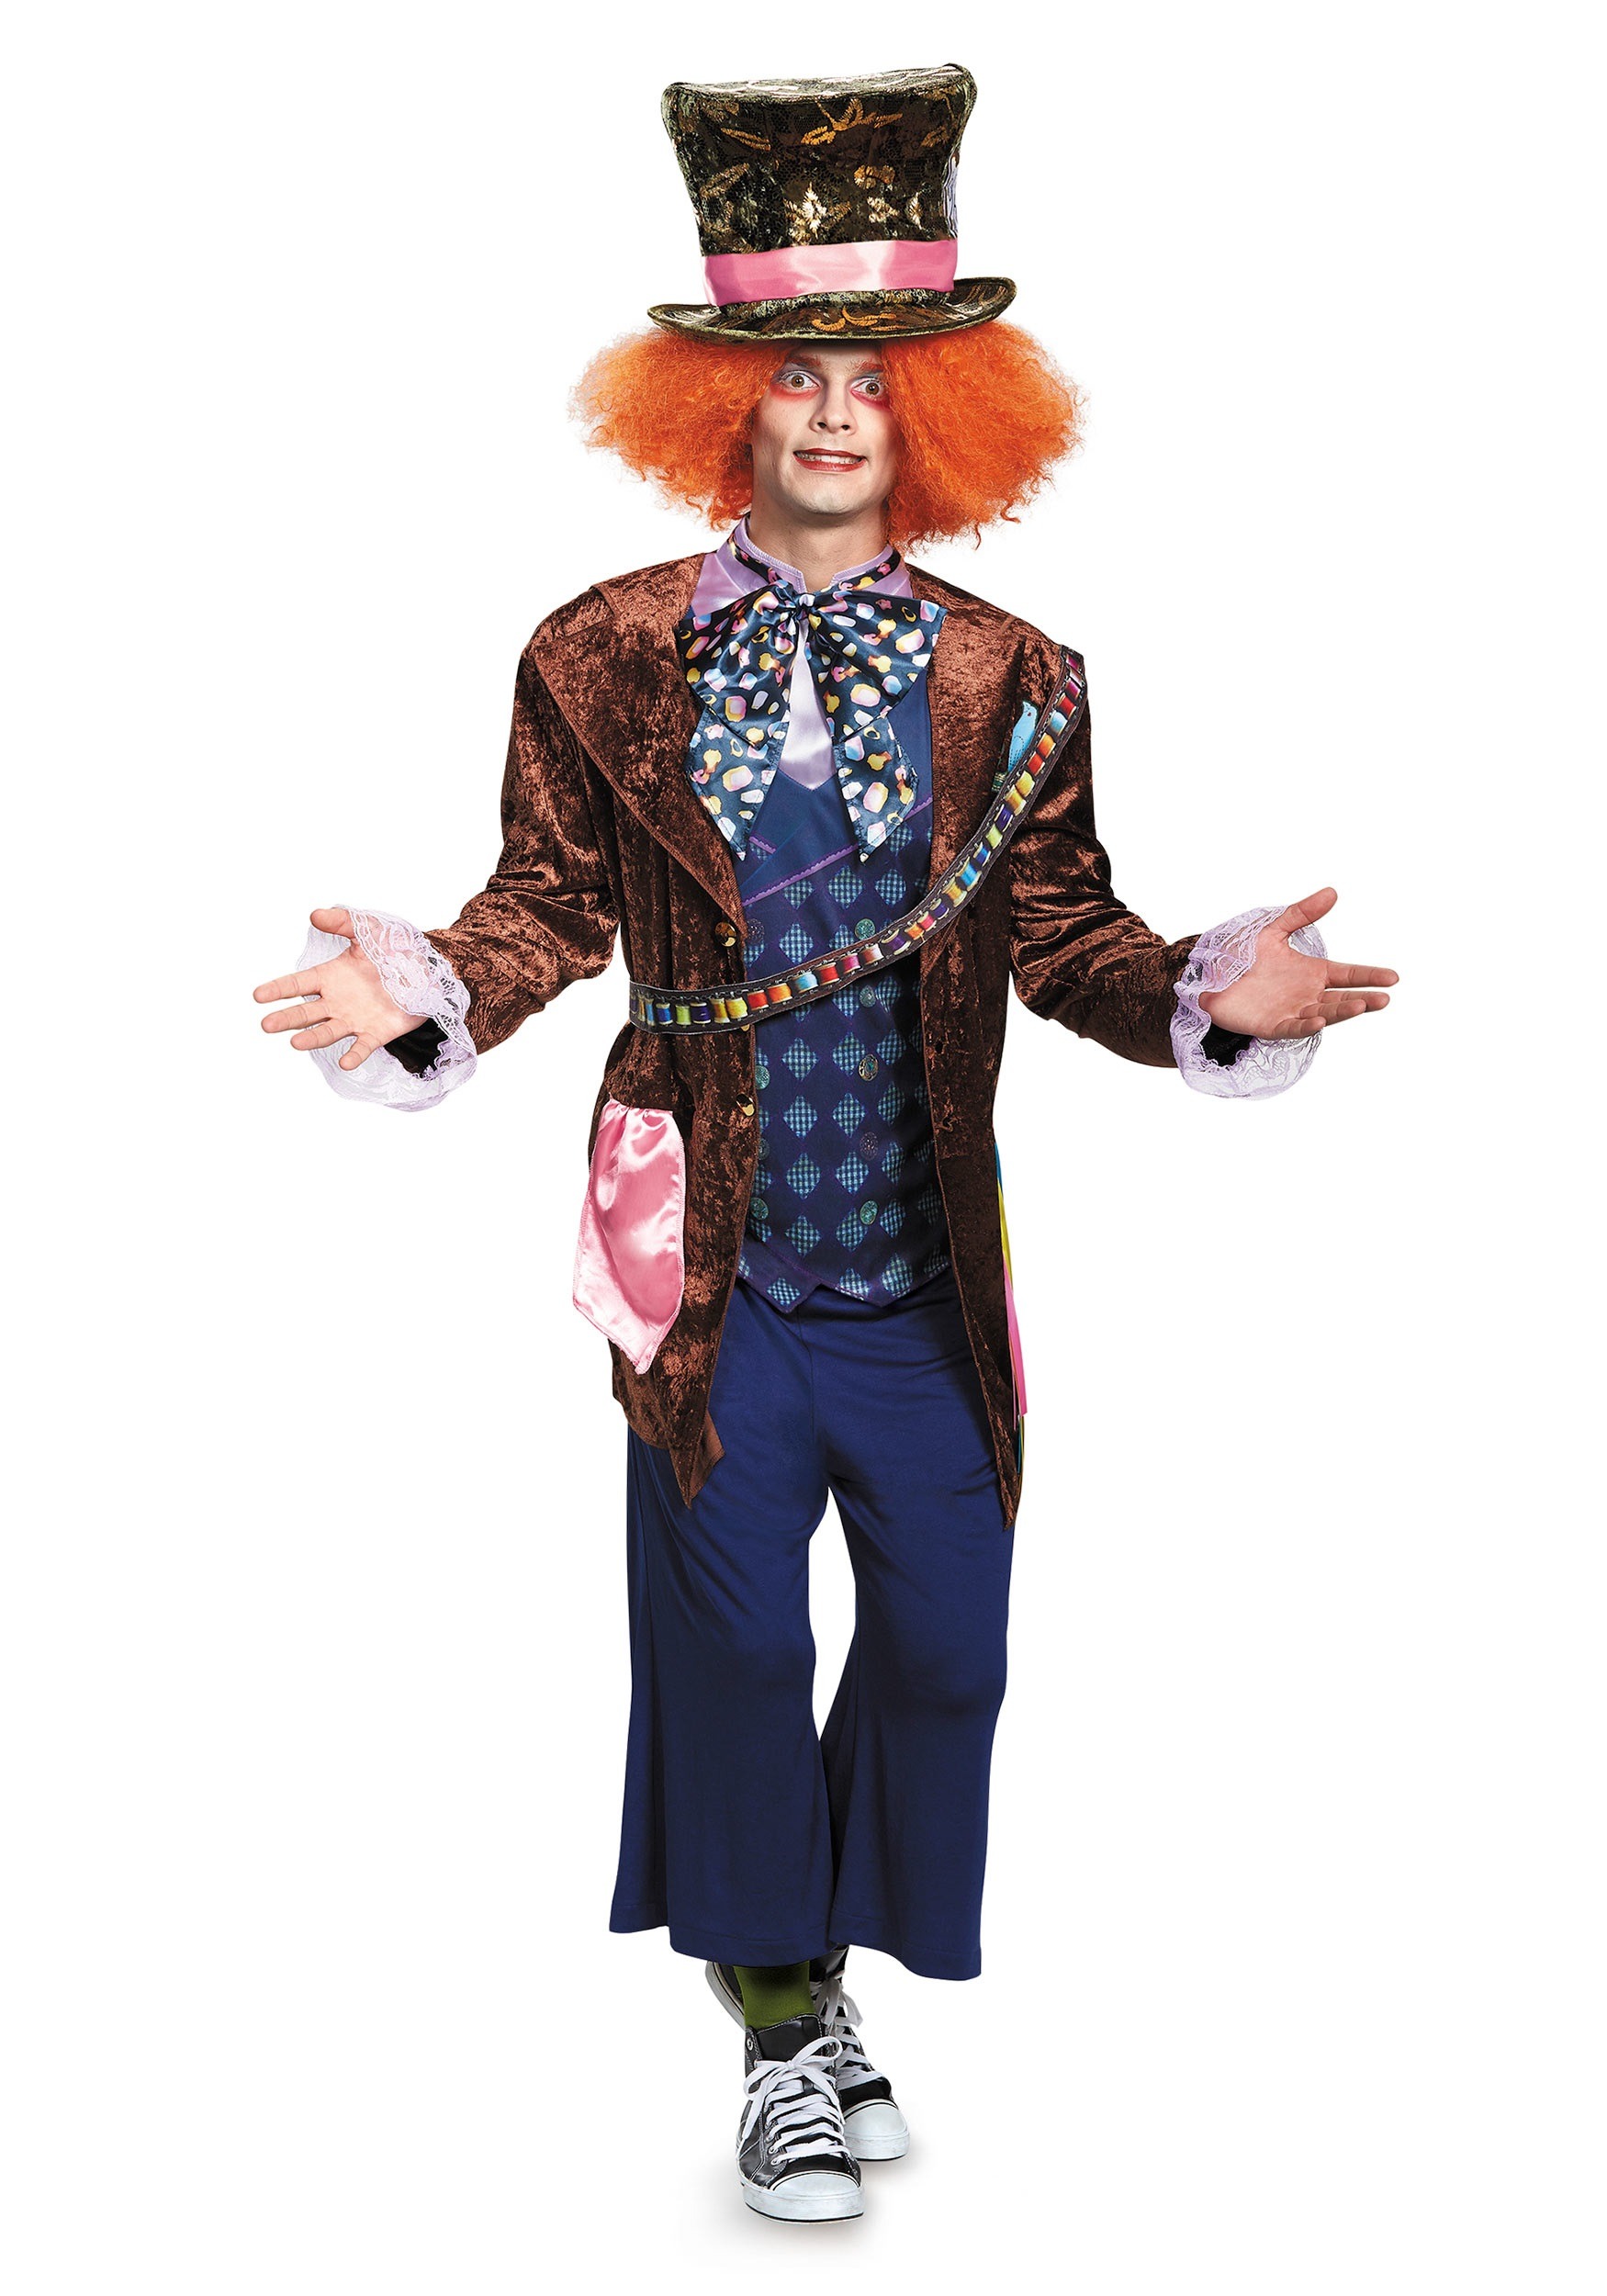 Image of Deluxe Adult Mad Hatter Costume | Movie Character Costume ID DI10195-S